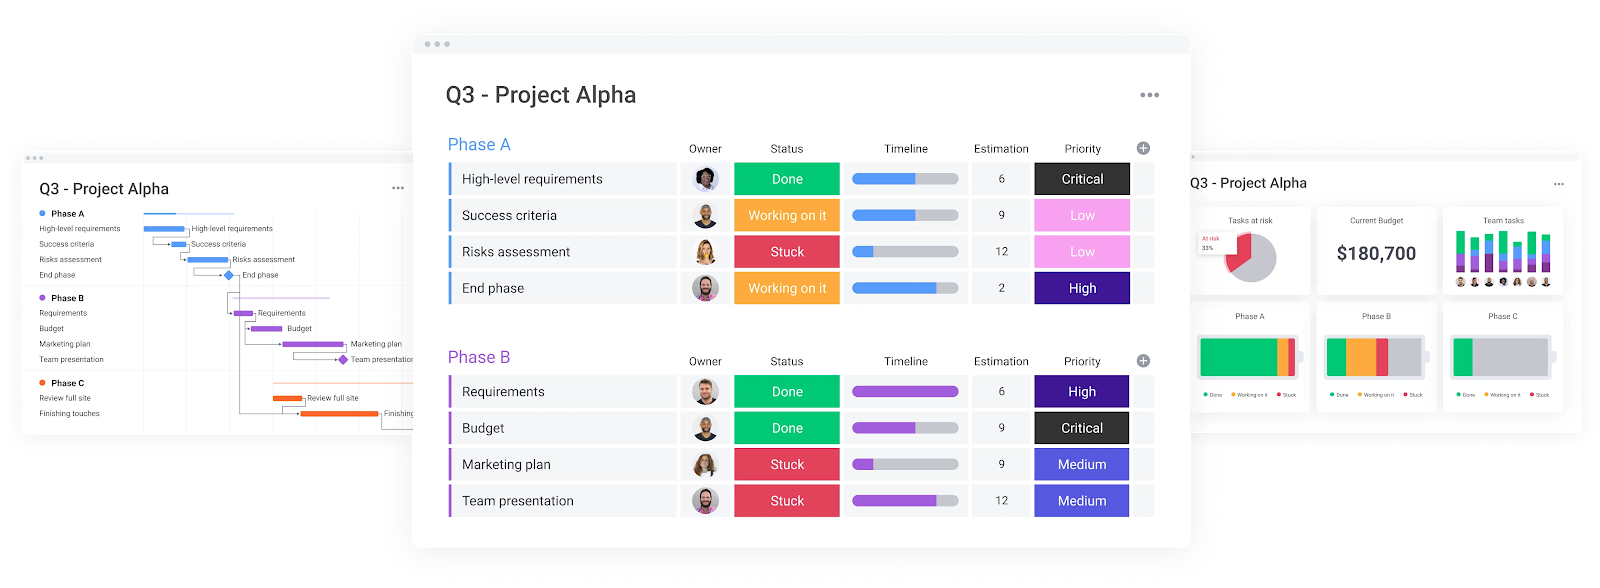 monday.com allows users to organize their entire project in one central location.